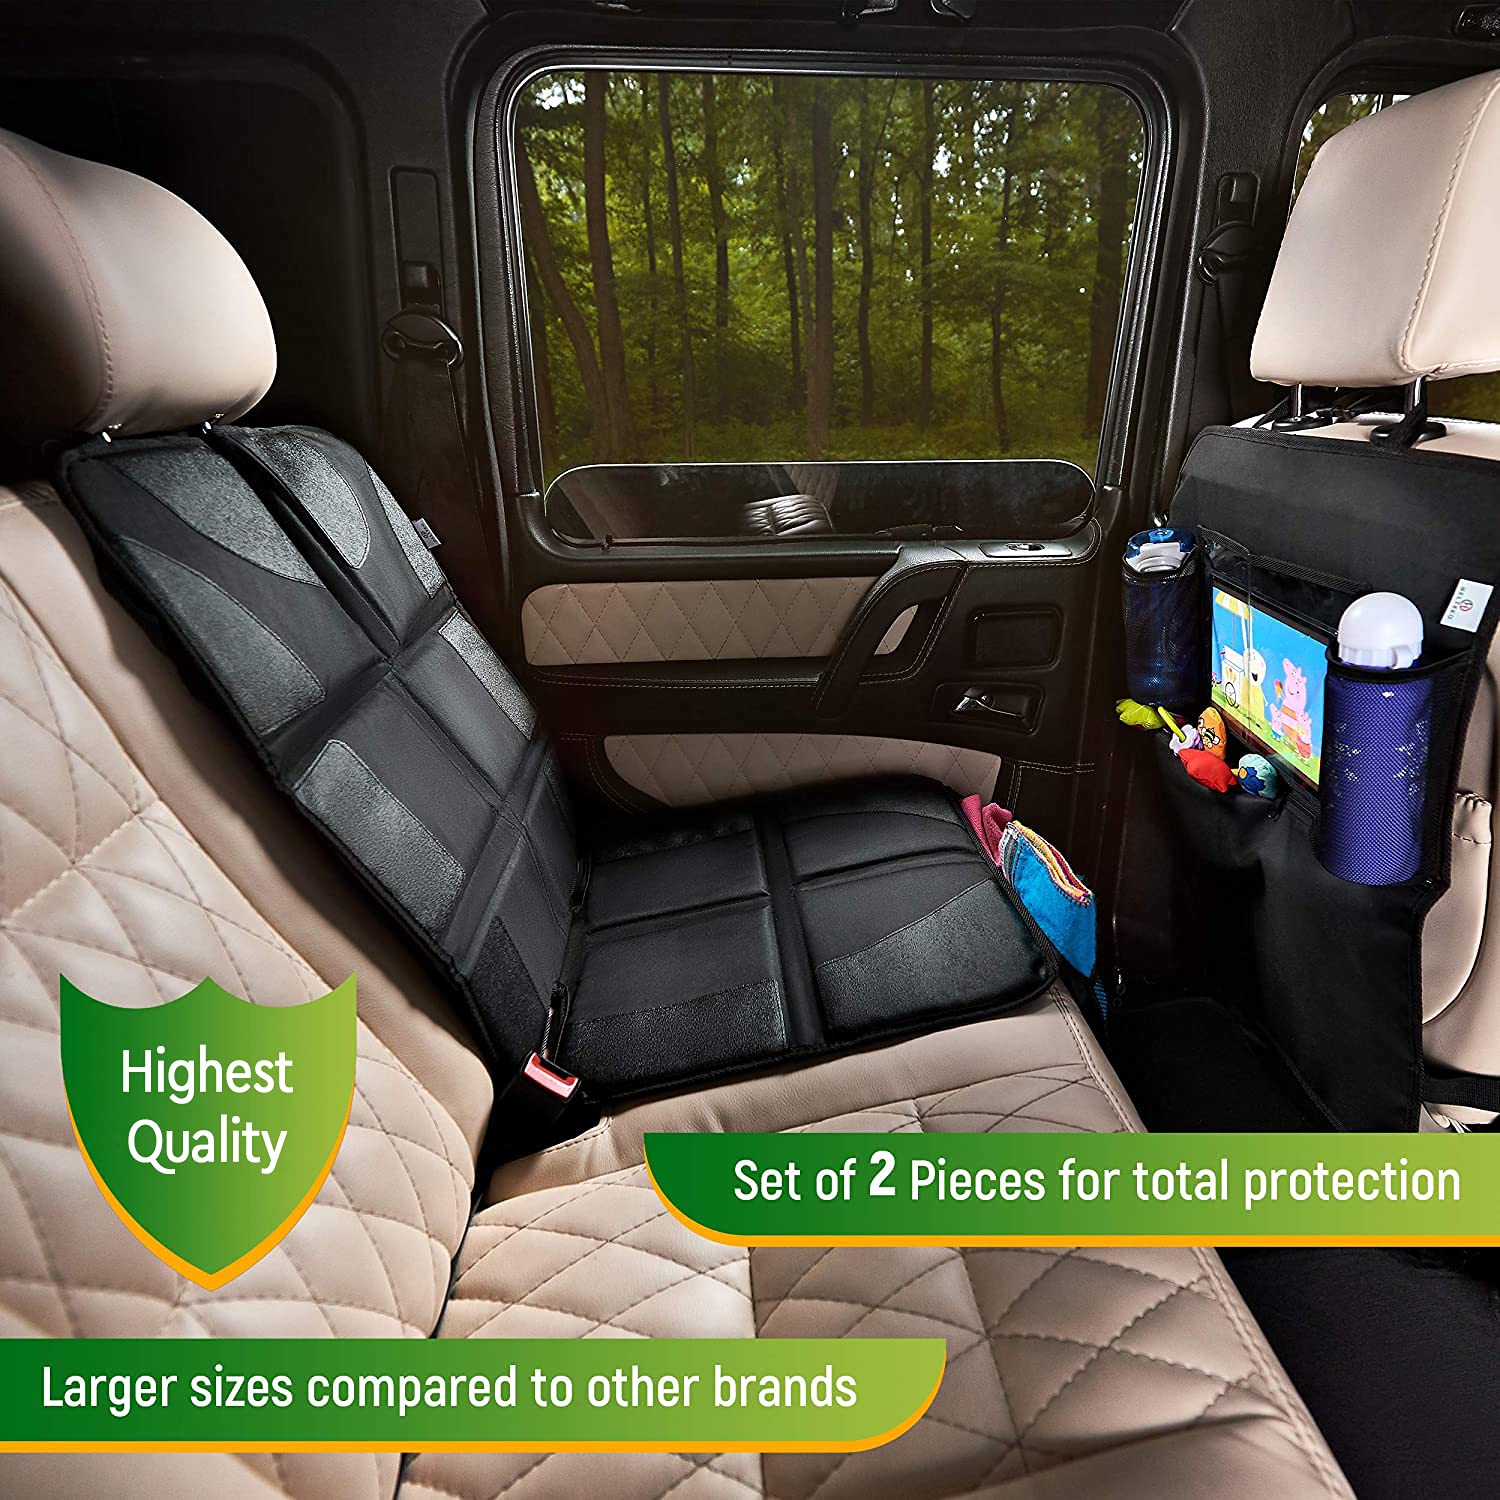 Car Seat Protector with Thickest Padding Backseat Car Organizer XL Largest Car Seat Cover for Child Baby Carseat Waterproof &